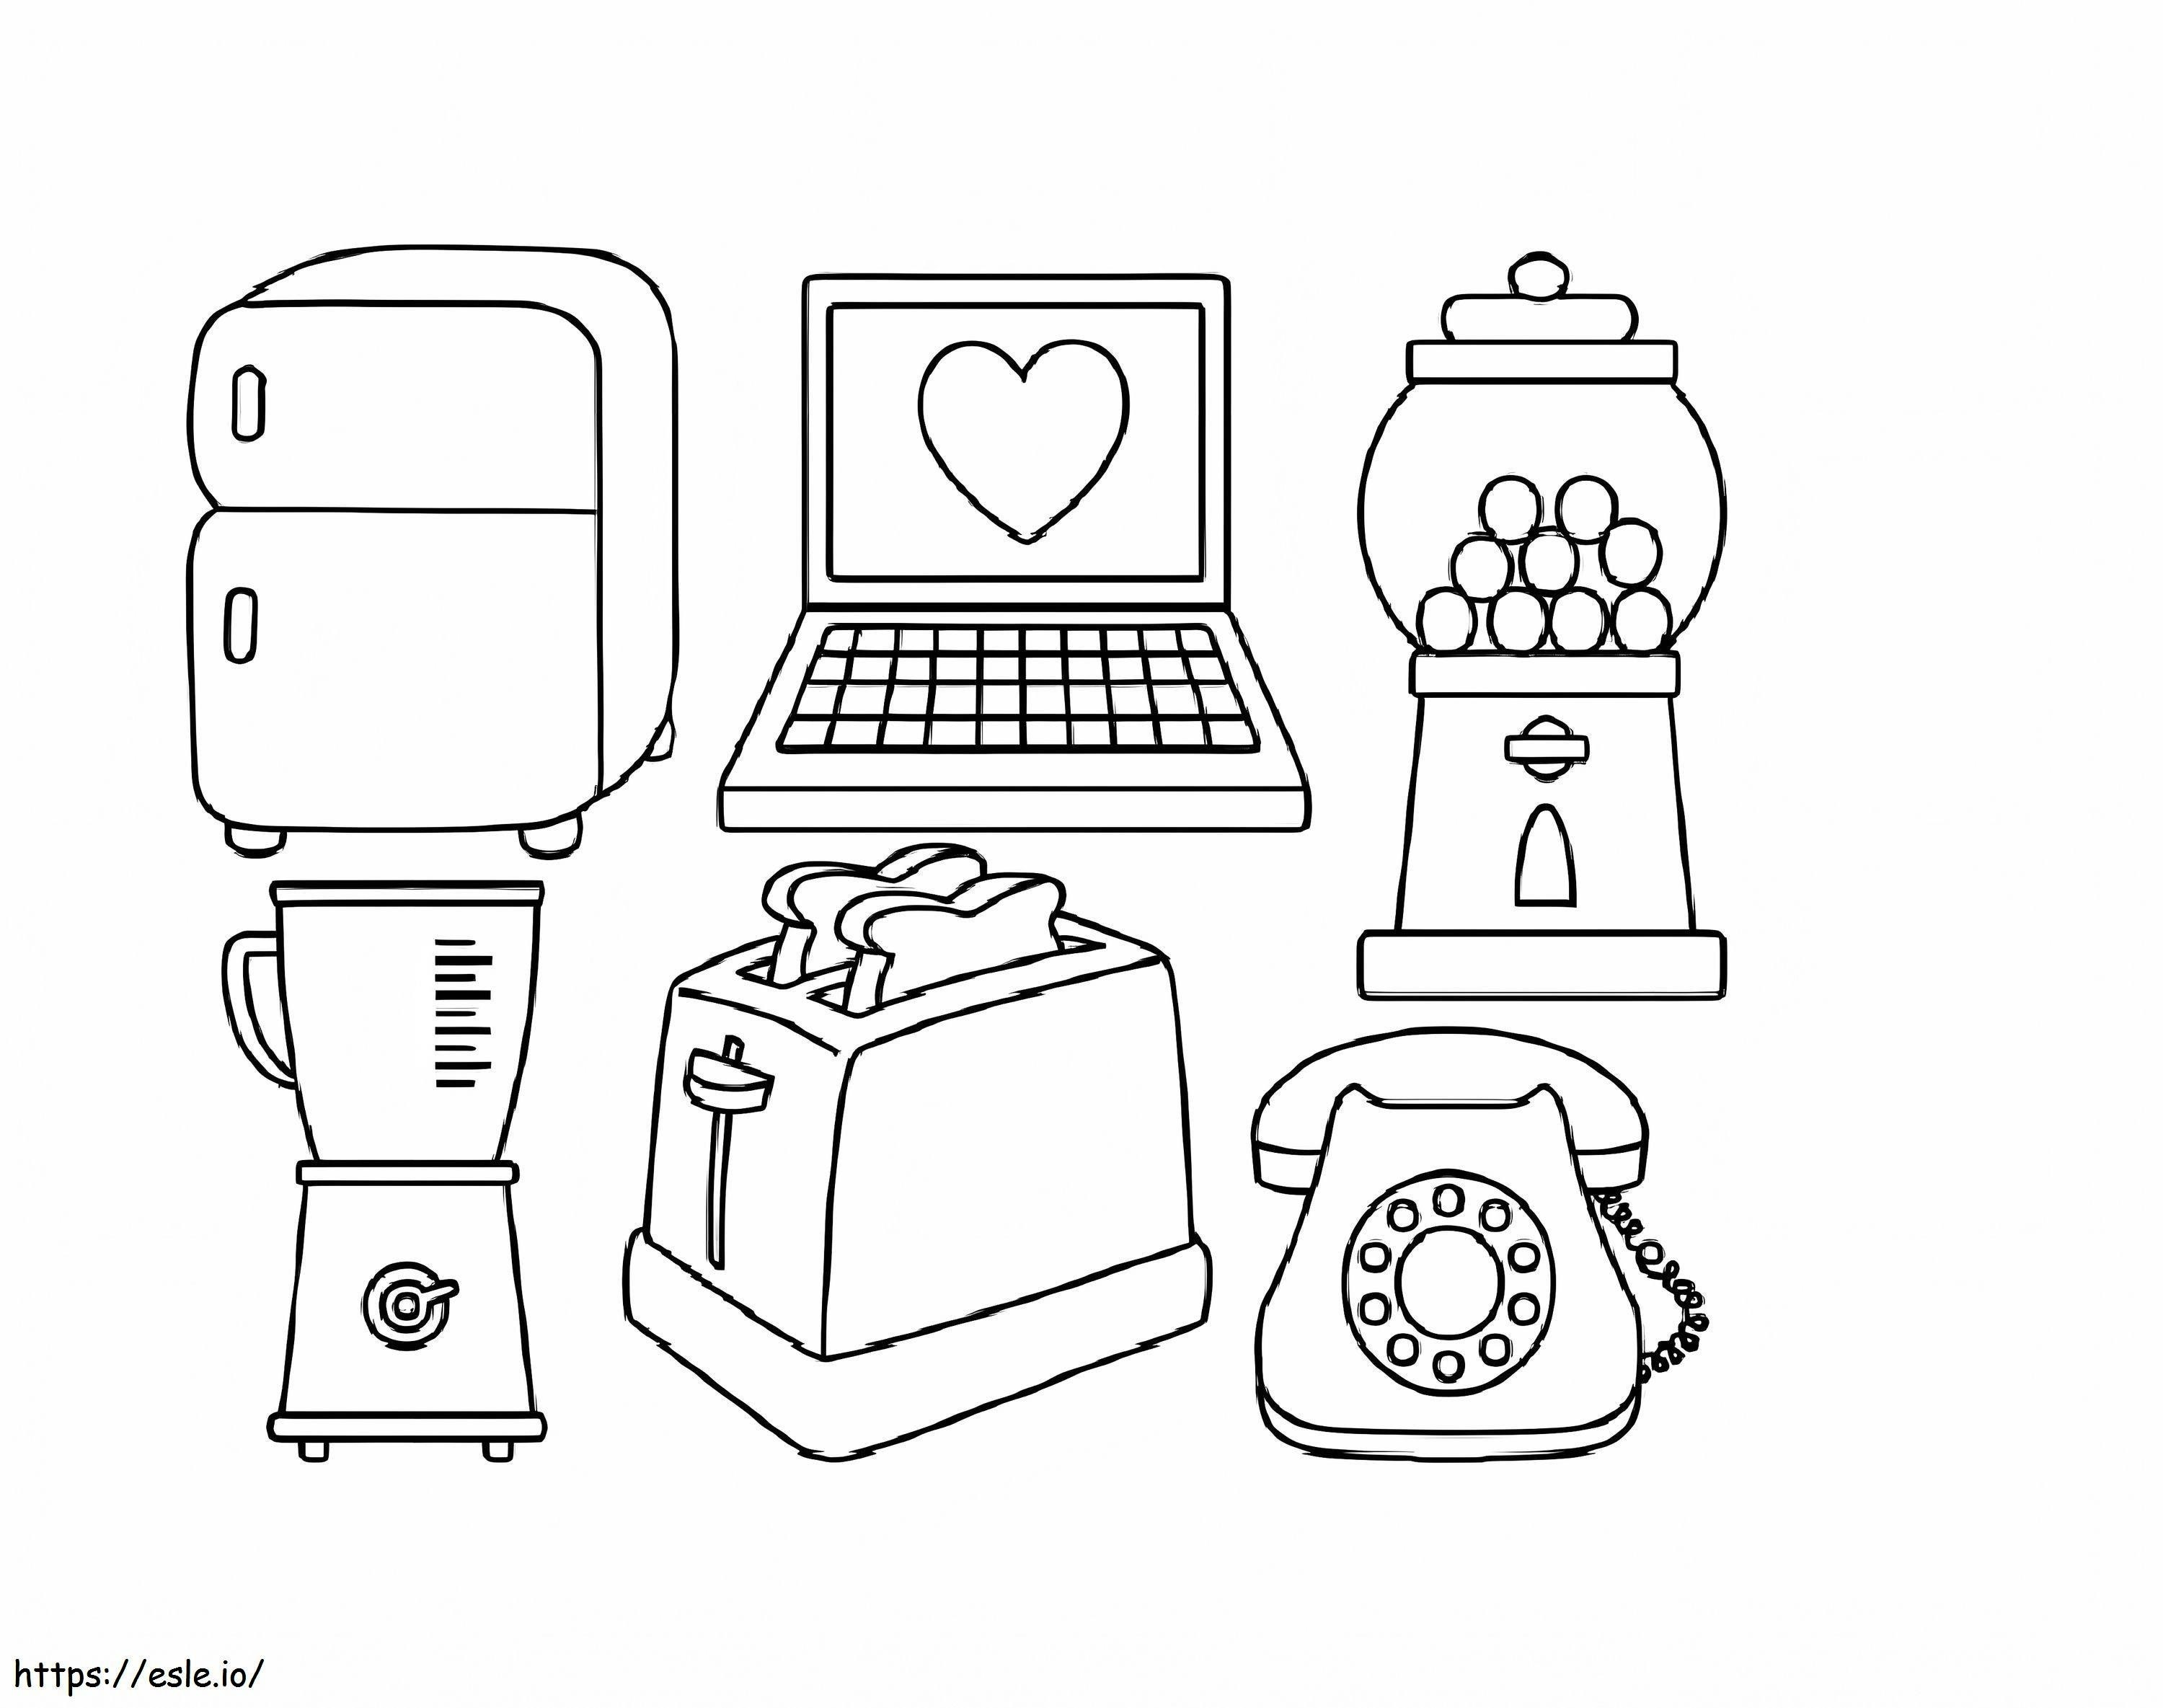 Machines In Your Home coloring page